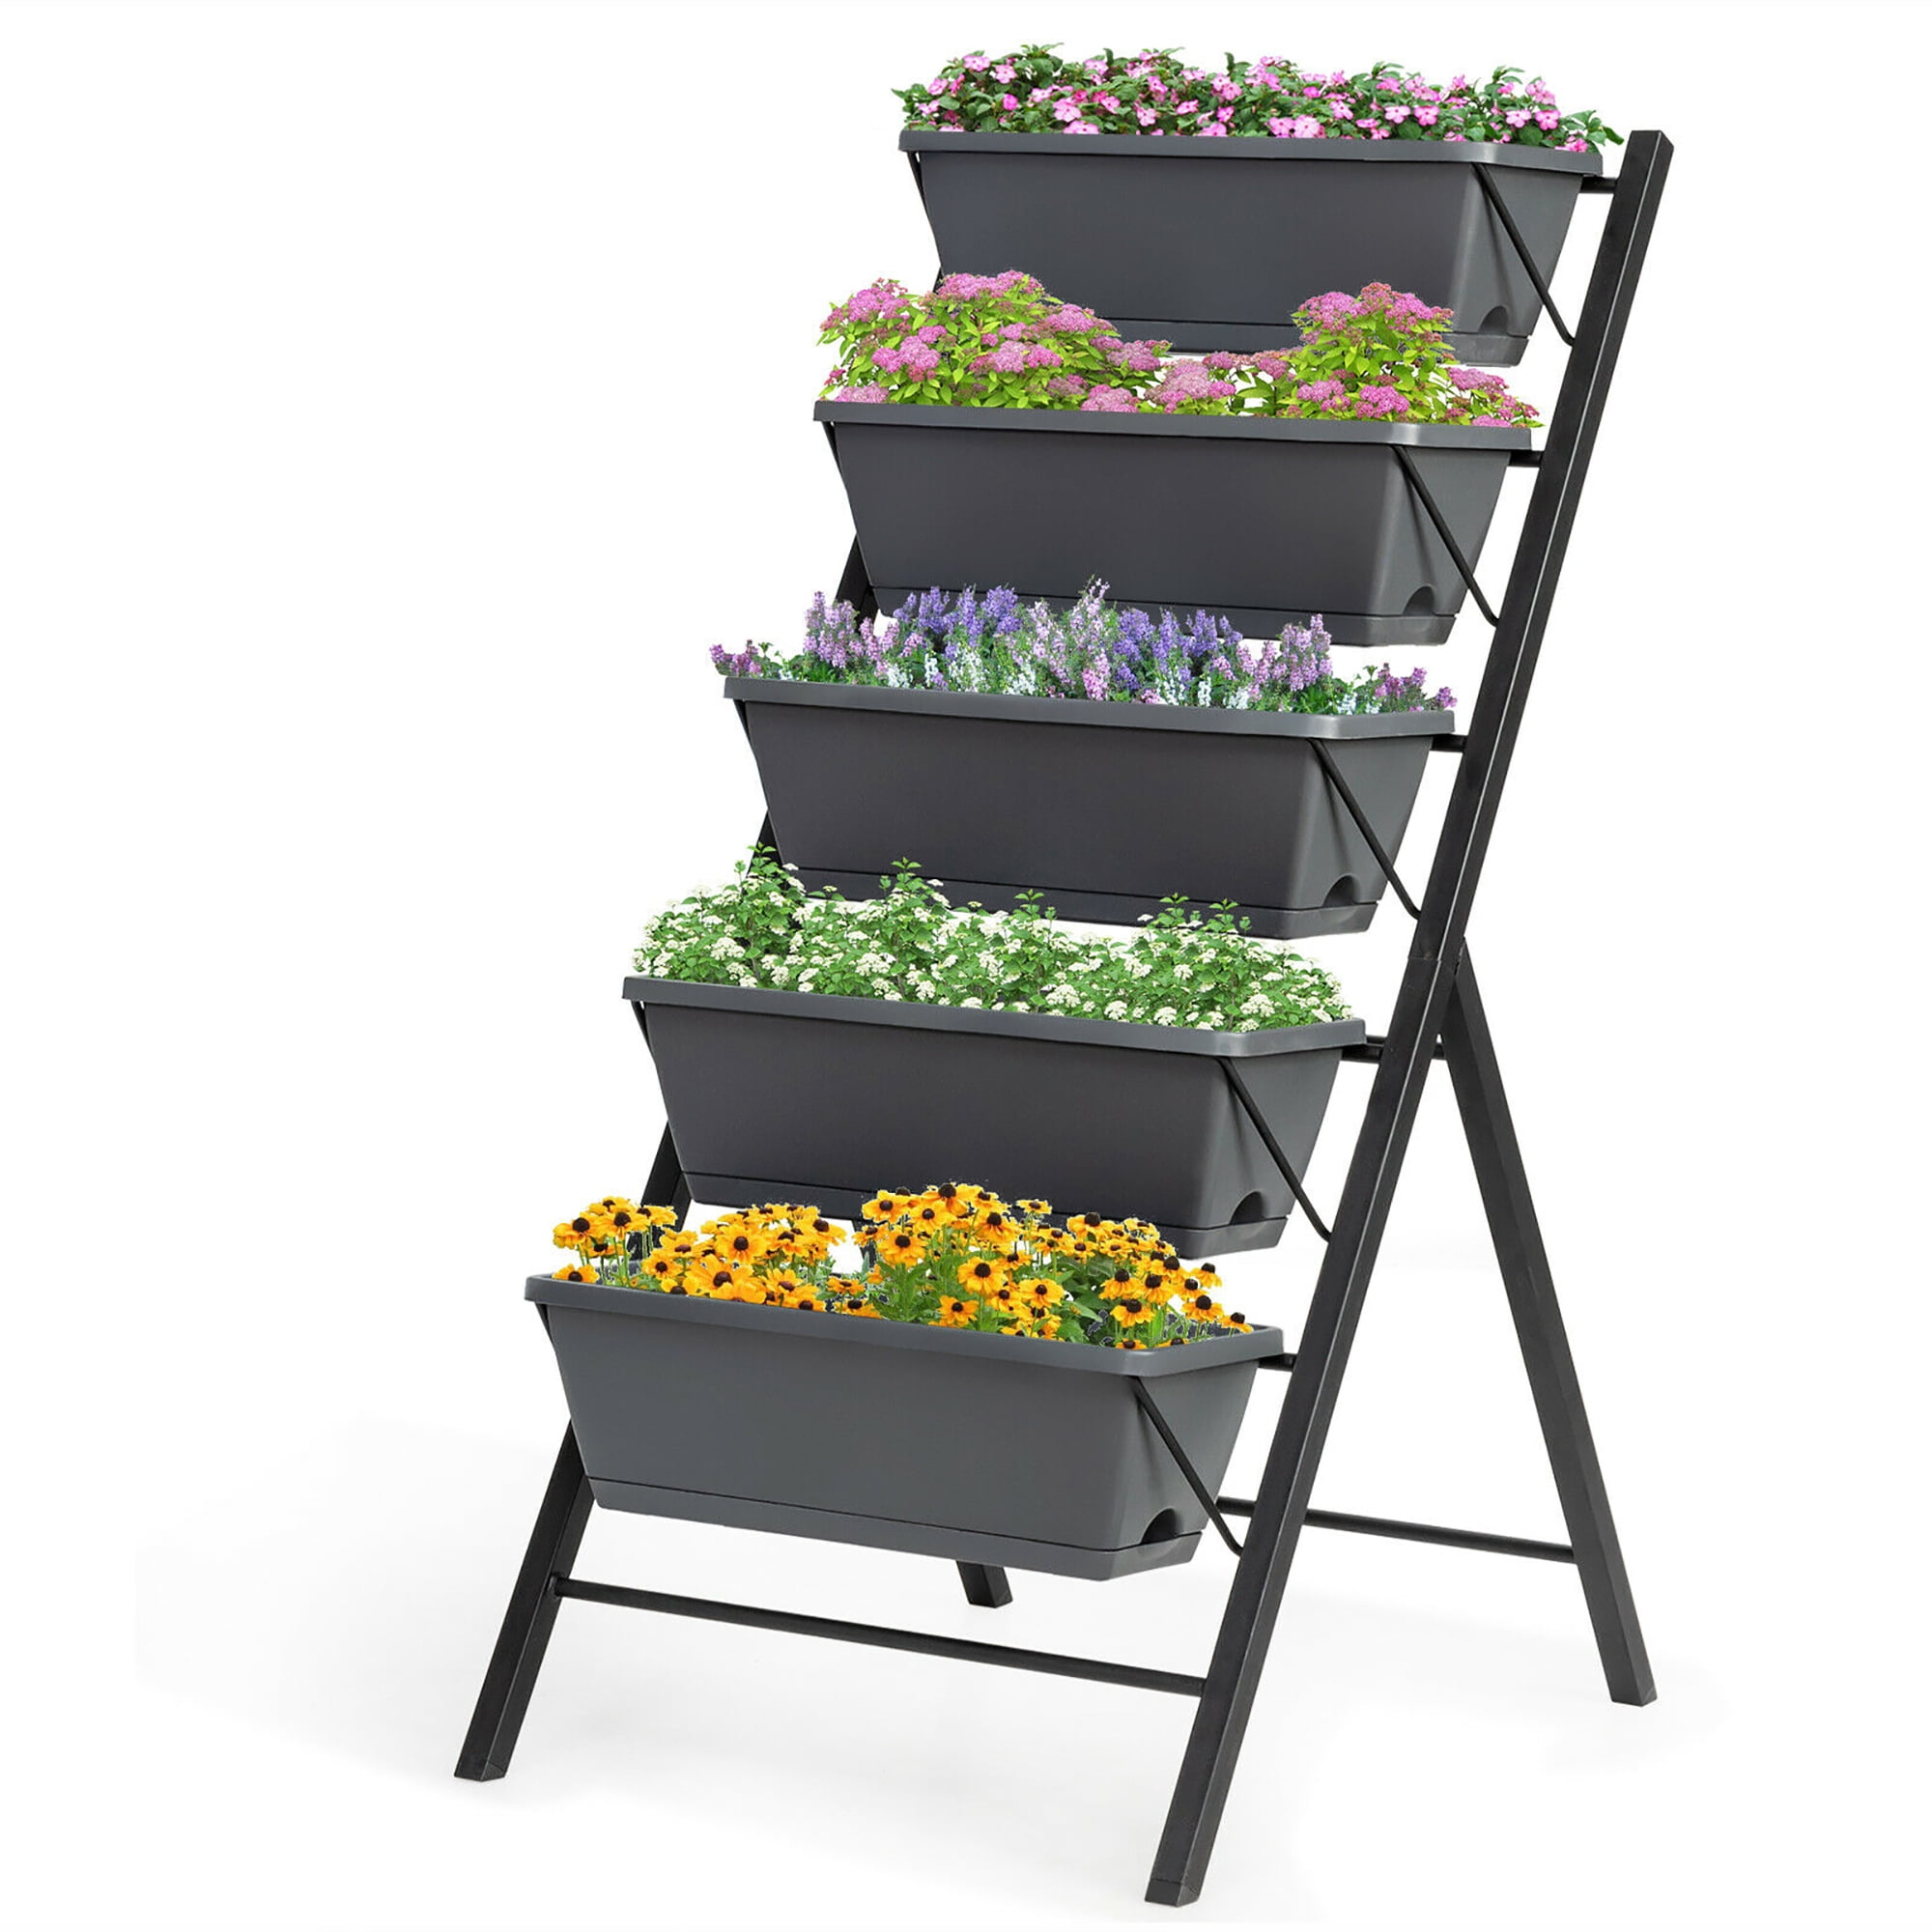 Steel Herb Tower Sturdy Tall Planter Relaxdays Vertical Flower Bed with 4 Flower Boxes Black Indoor or Outdoor Use 